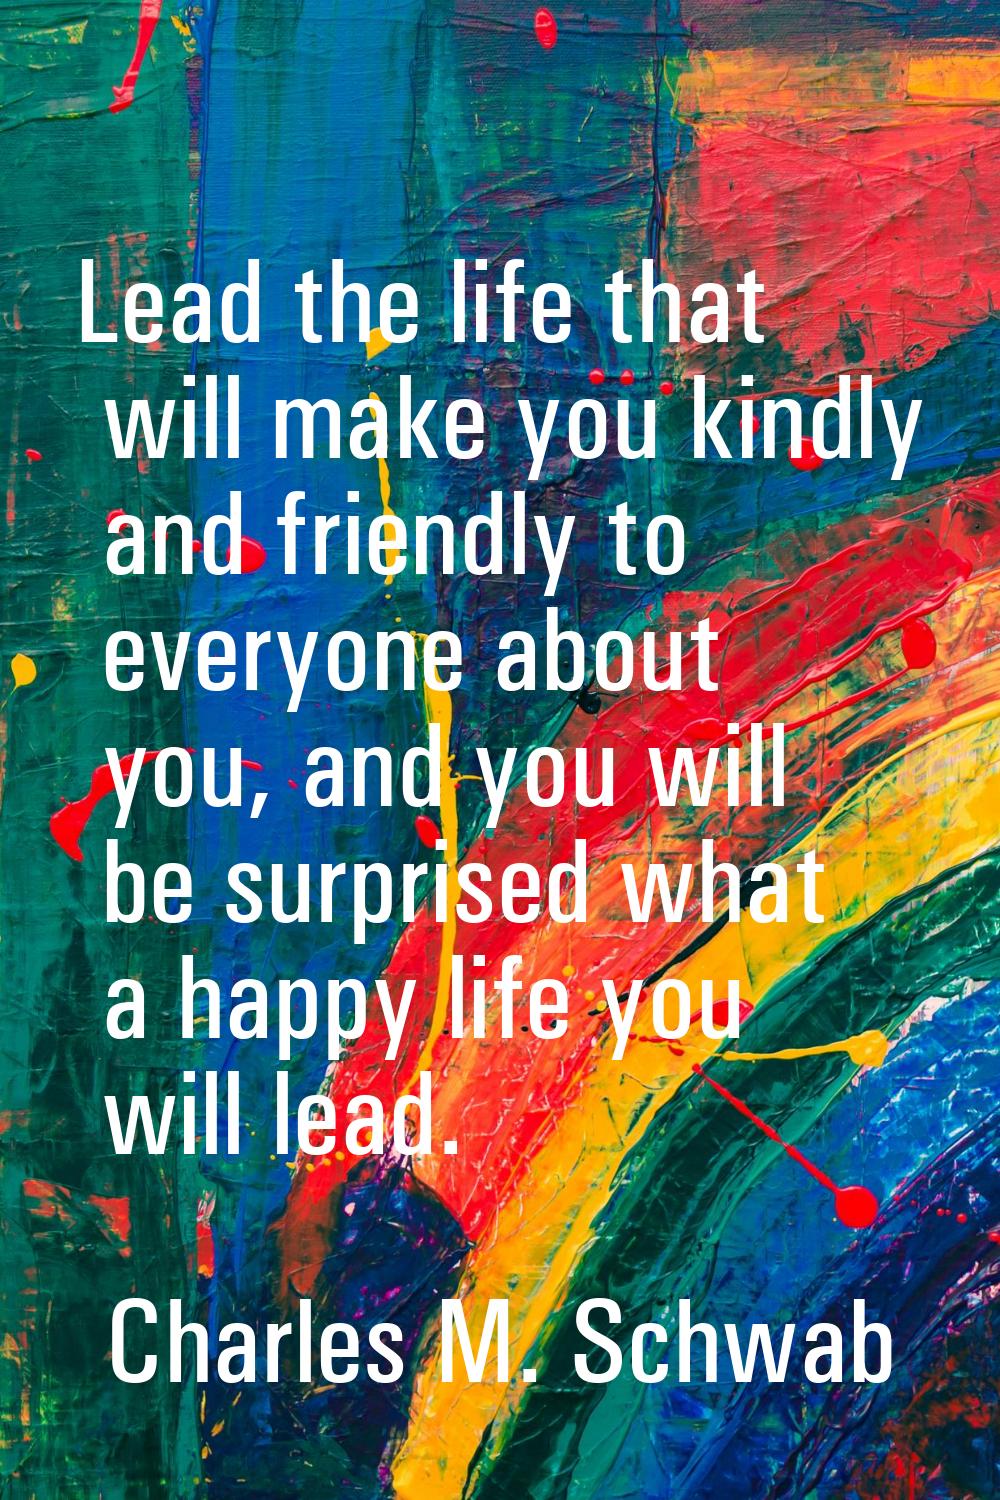 Lead the life that will make you kindly and friendly to everyone about you, and you will be surpris